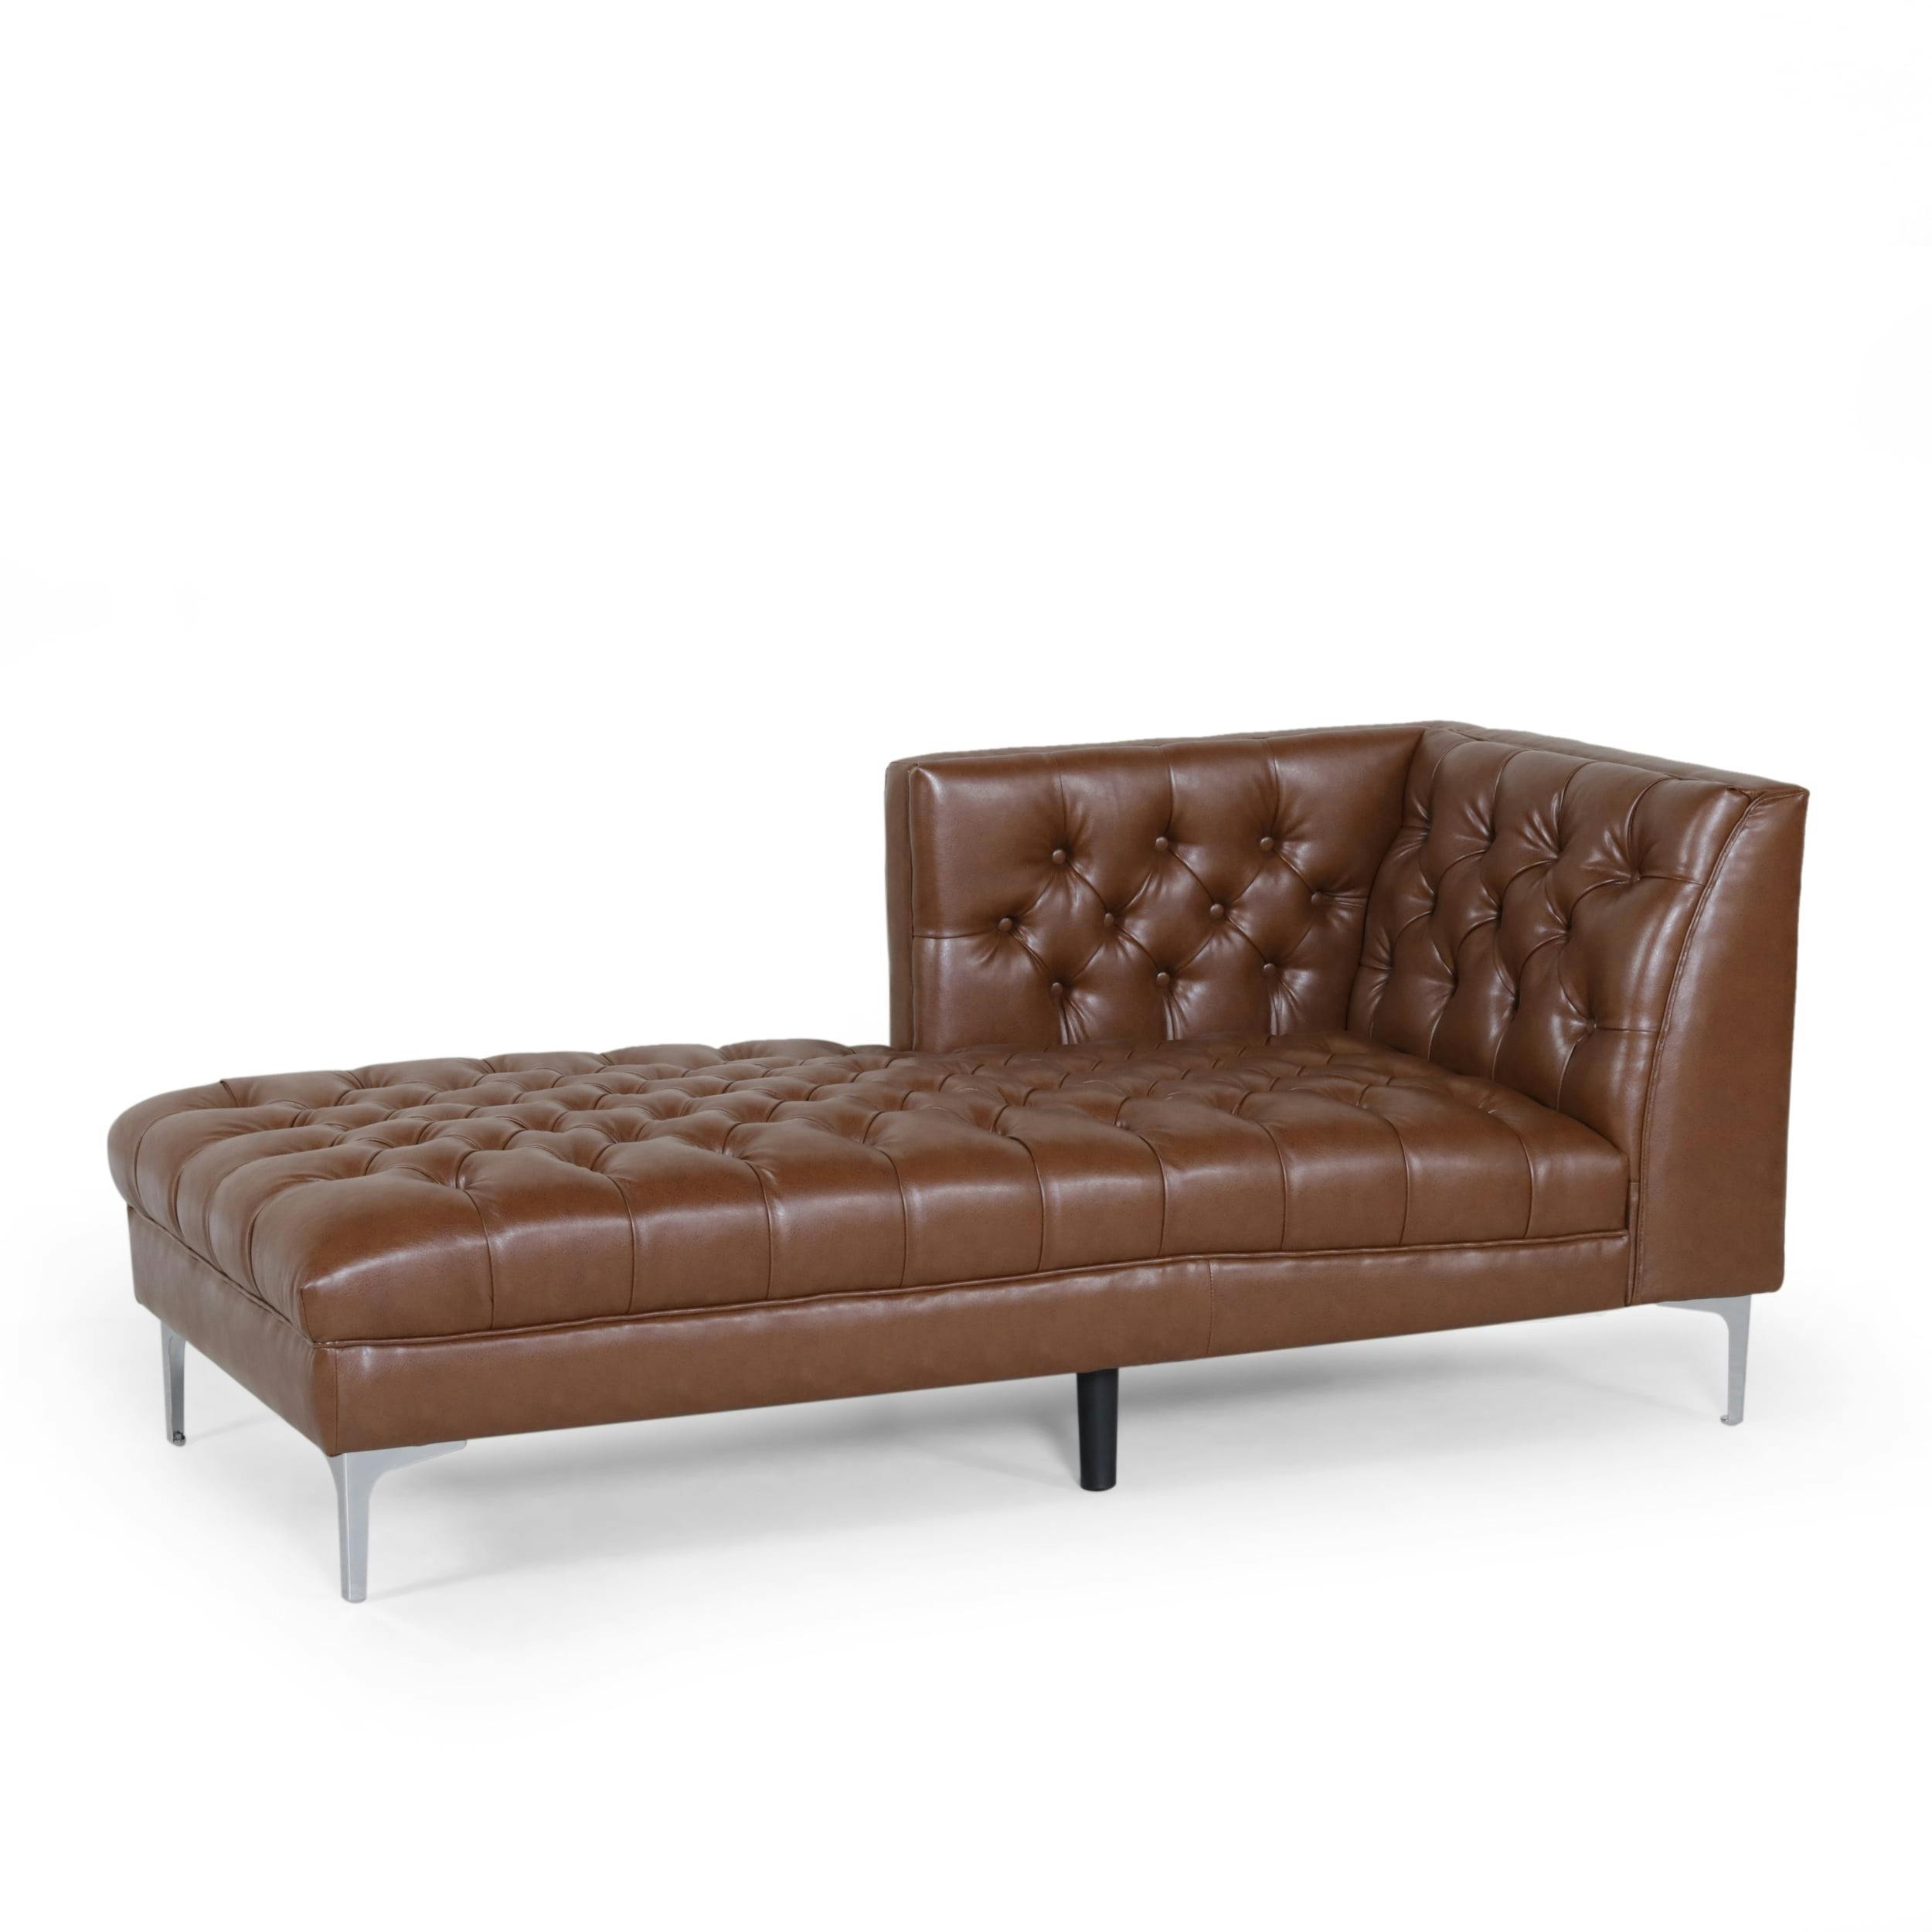 Bluffton Silver Cognac Faux Leather Contemporary Chaise Lounge